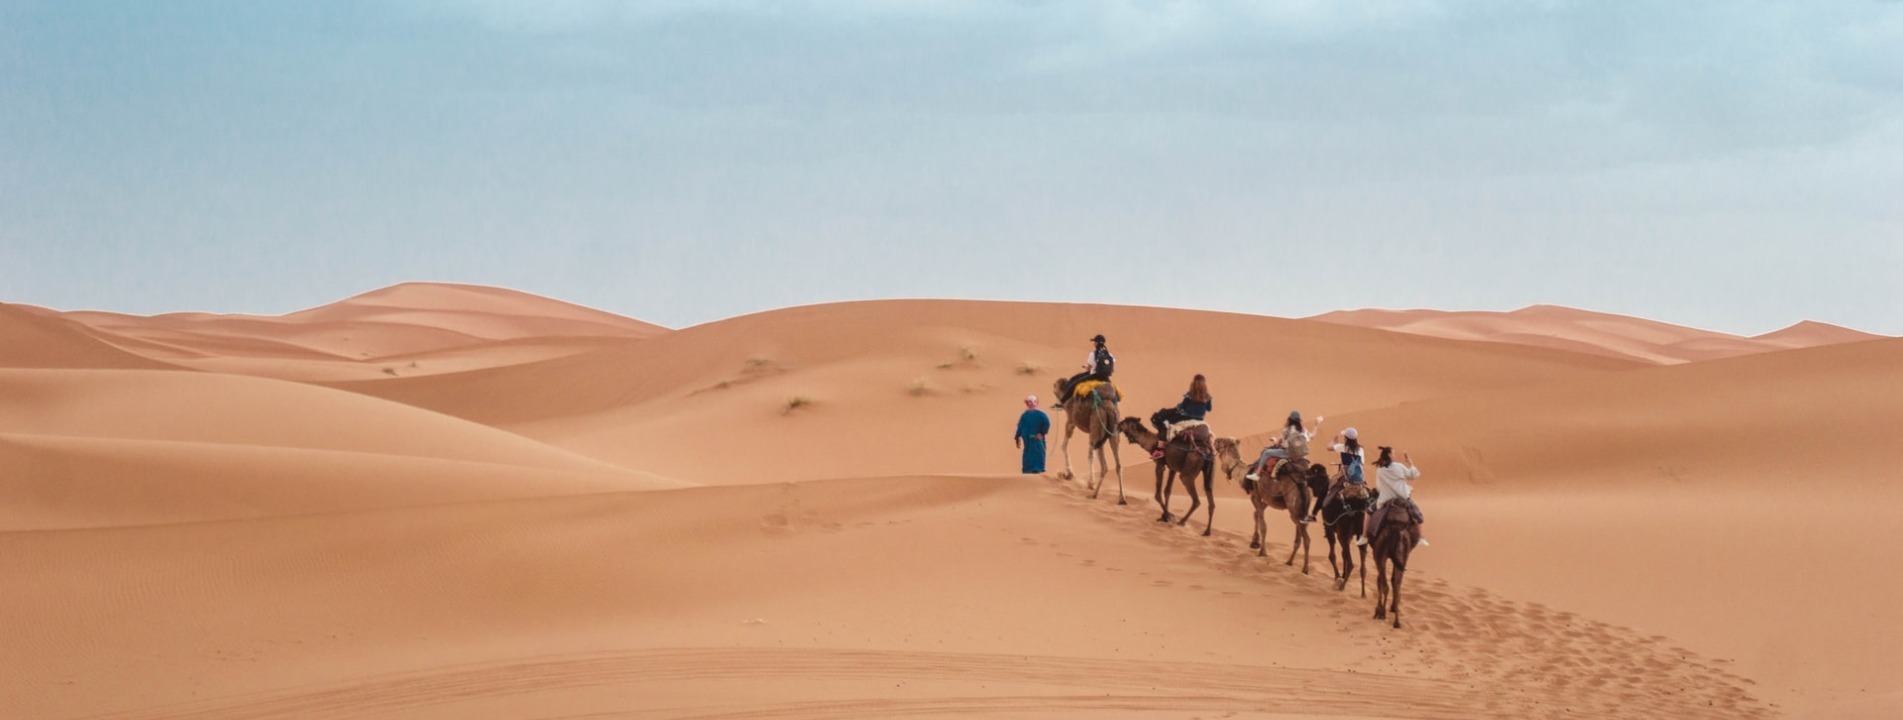 How to Plan a Desert Trip in Morocco?